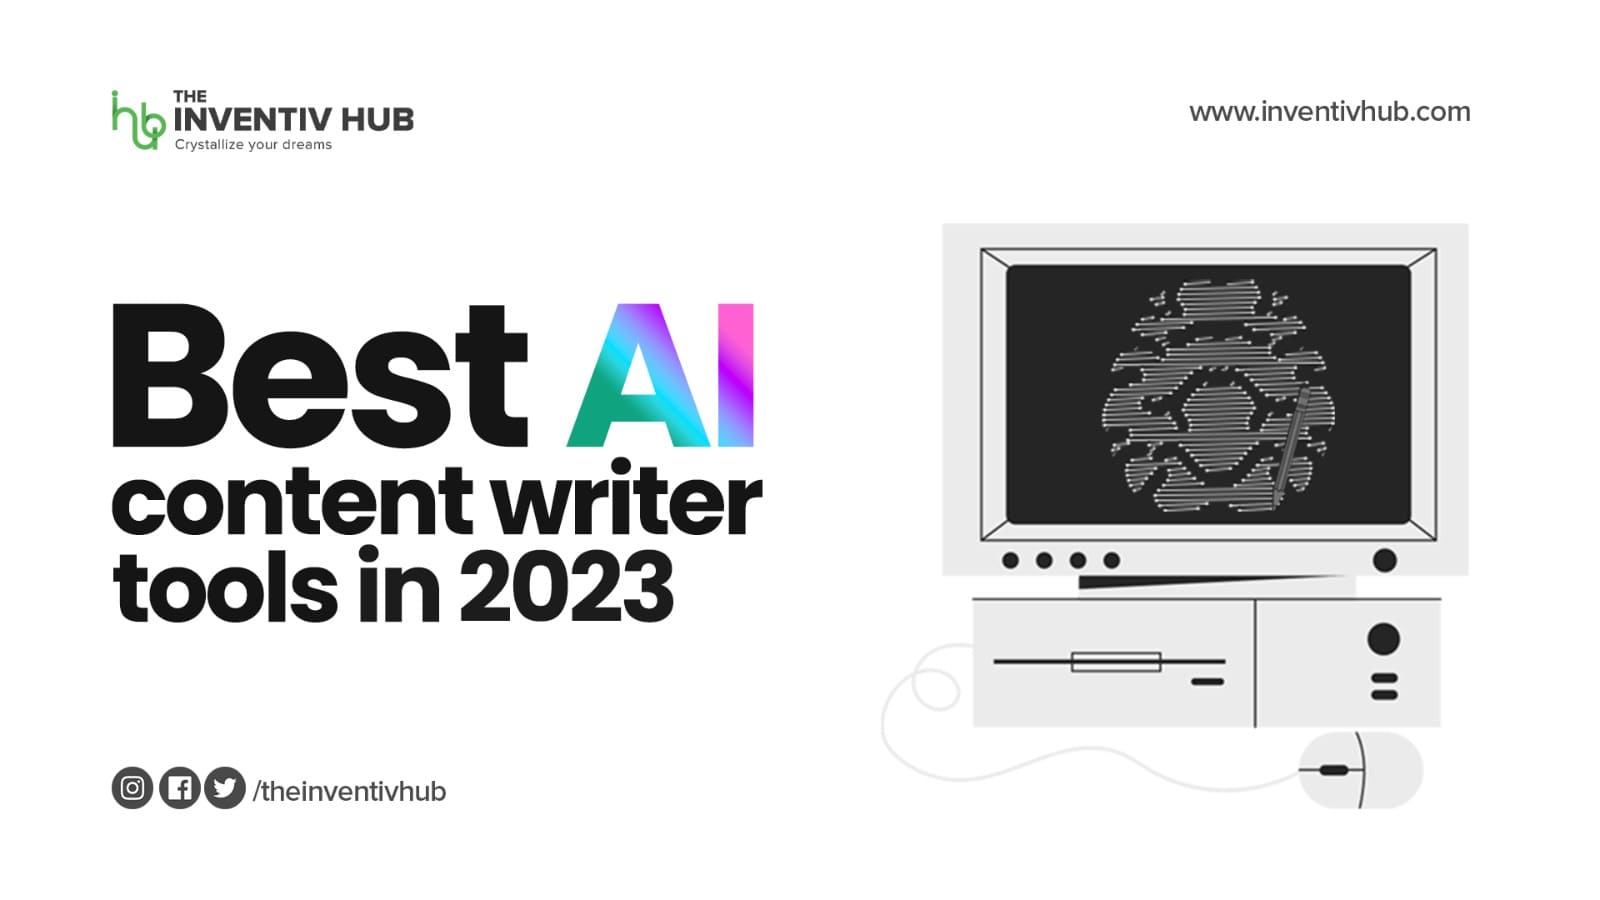 Best AI content writer tools in 2023